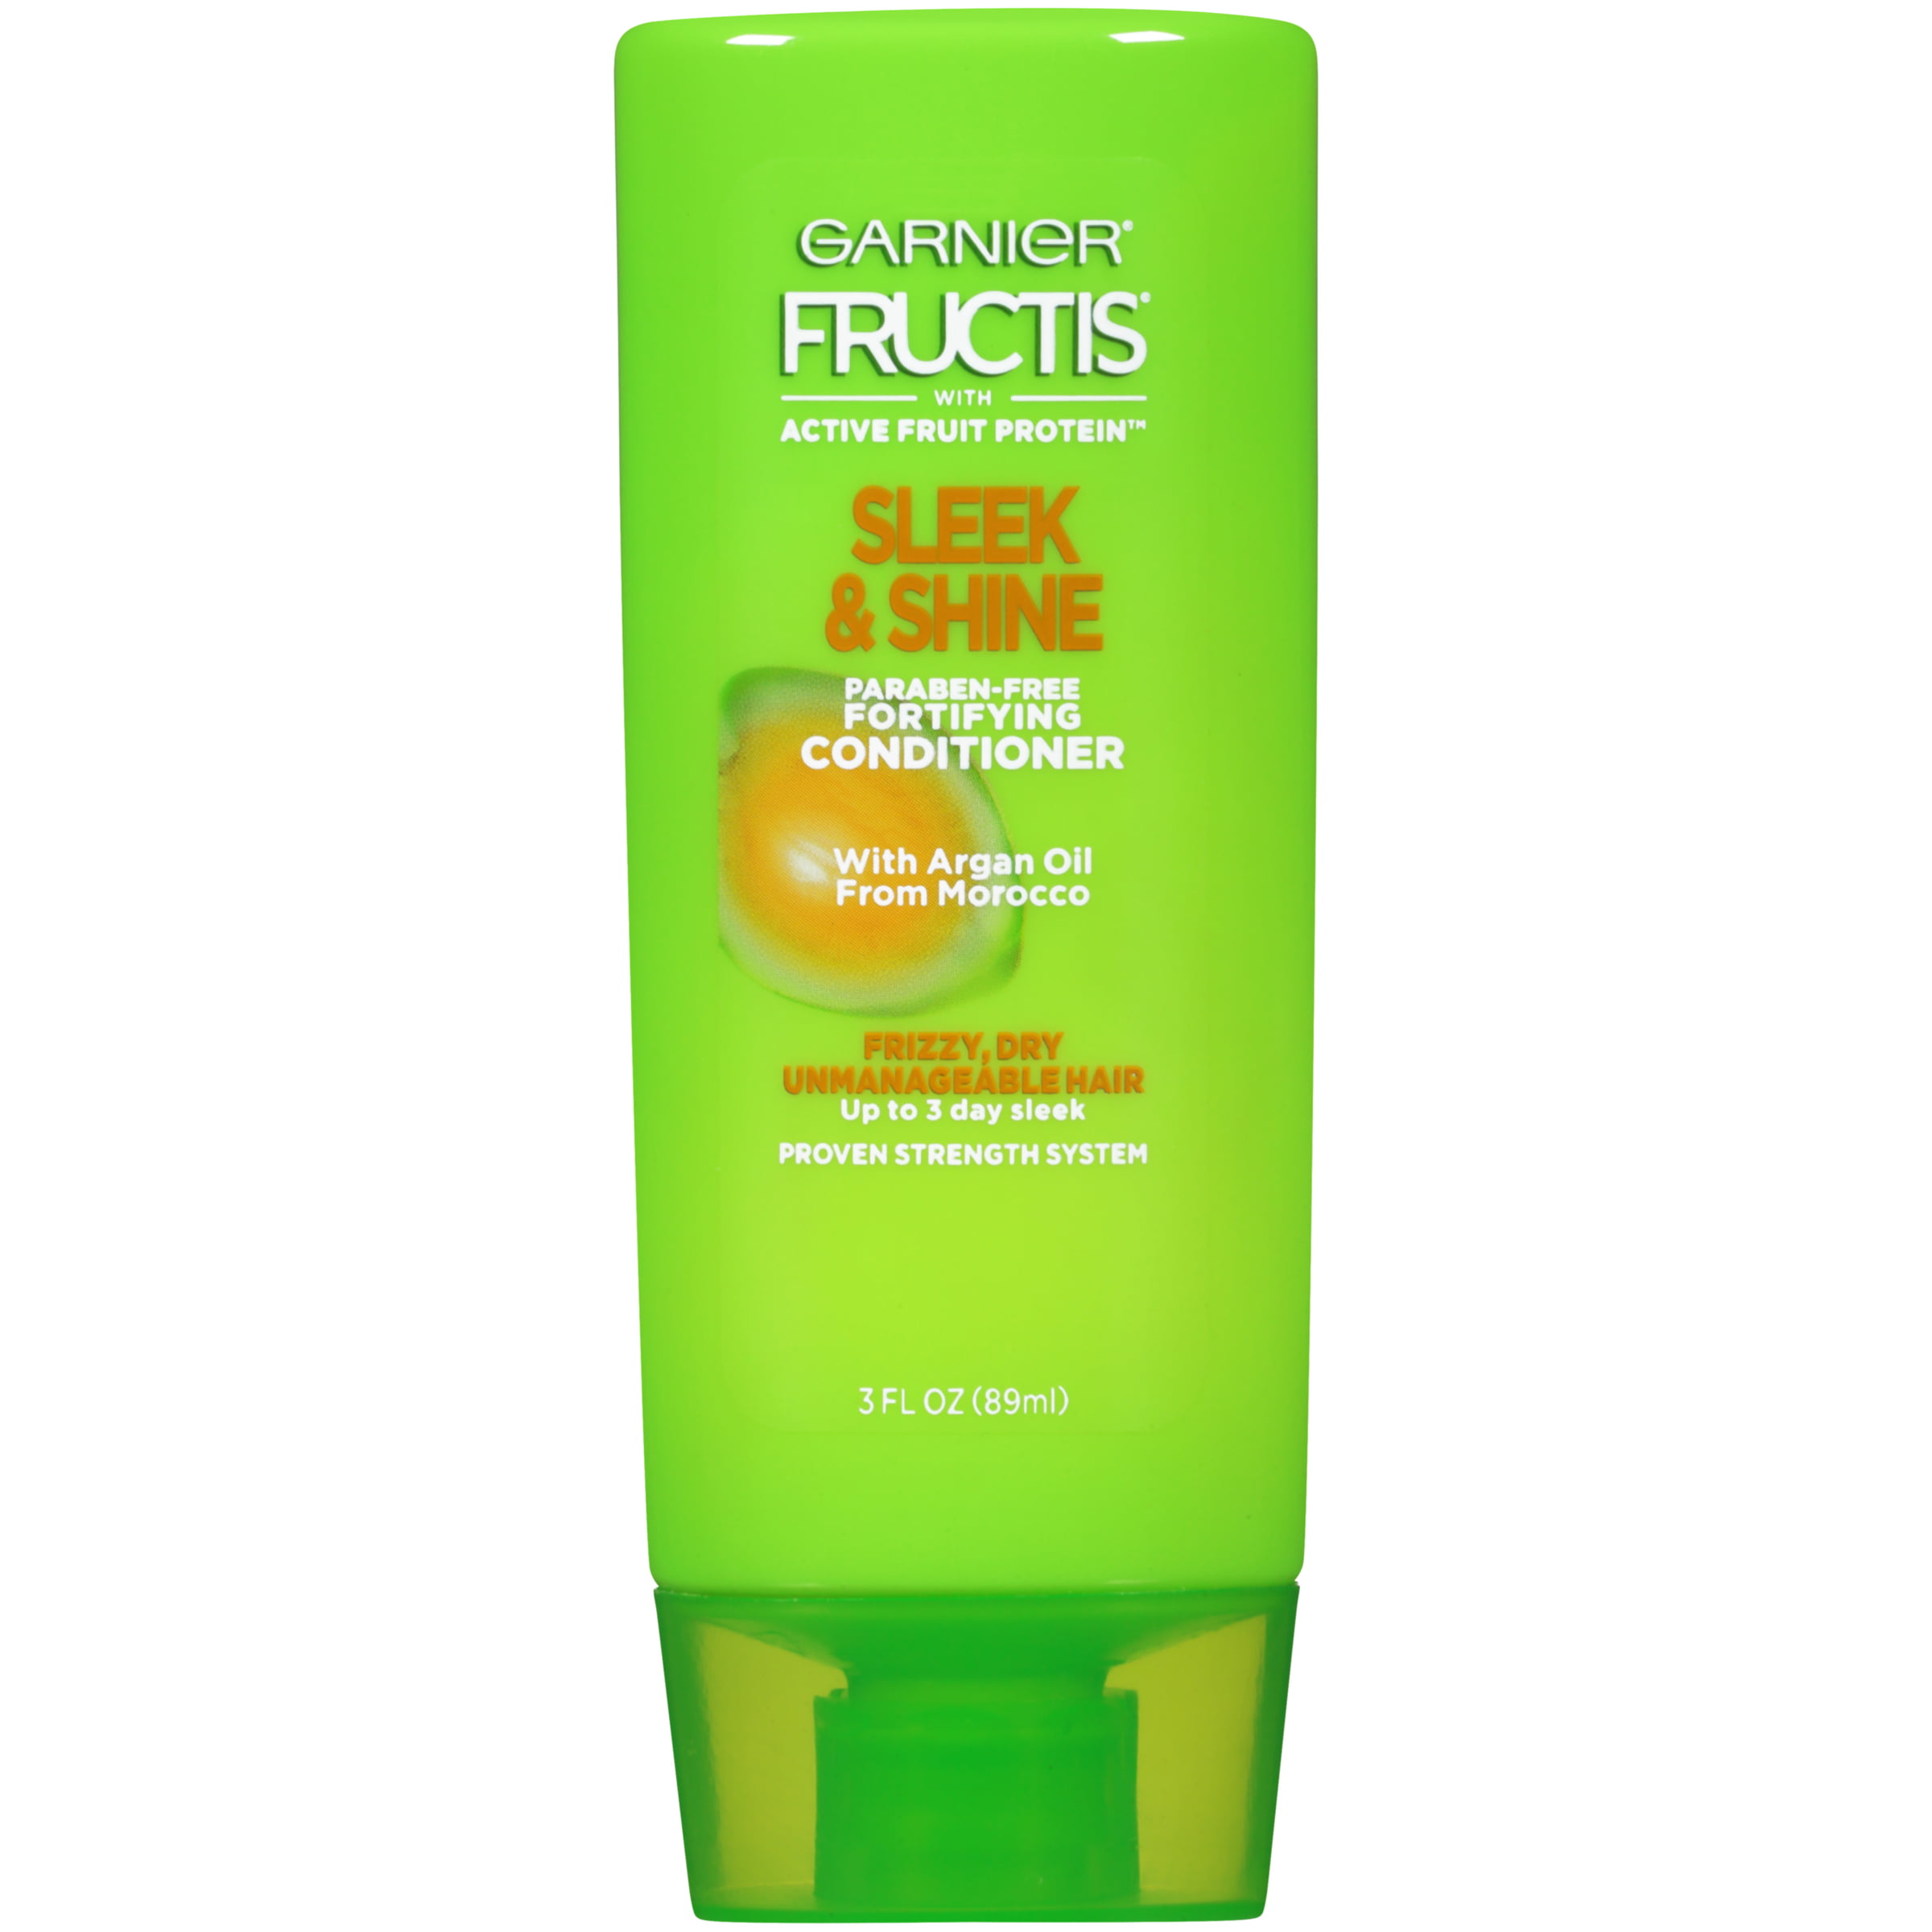 garnier-fructis-sleek-shine-conditioner-frizzy-dry-unmanageable